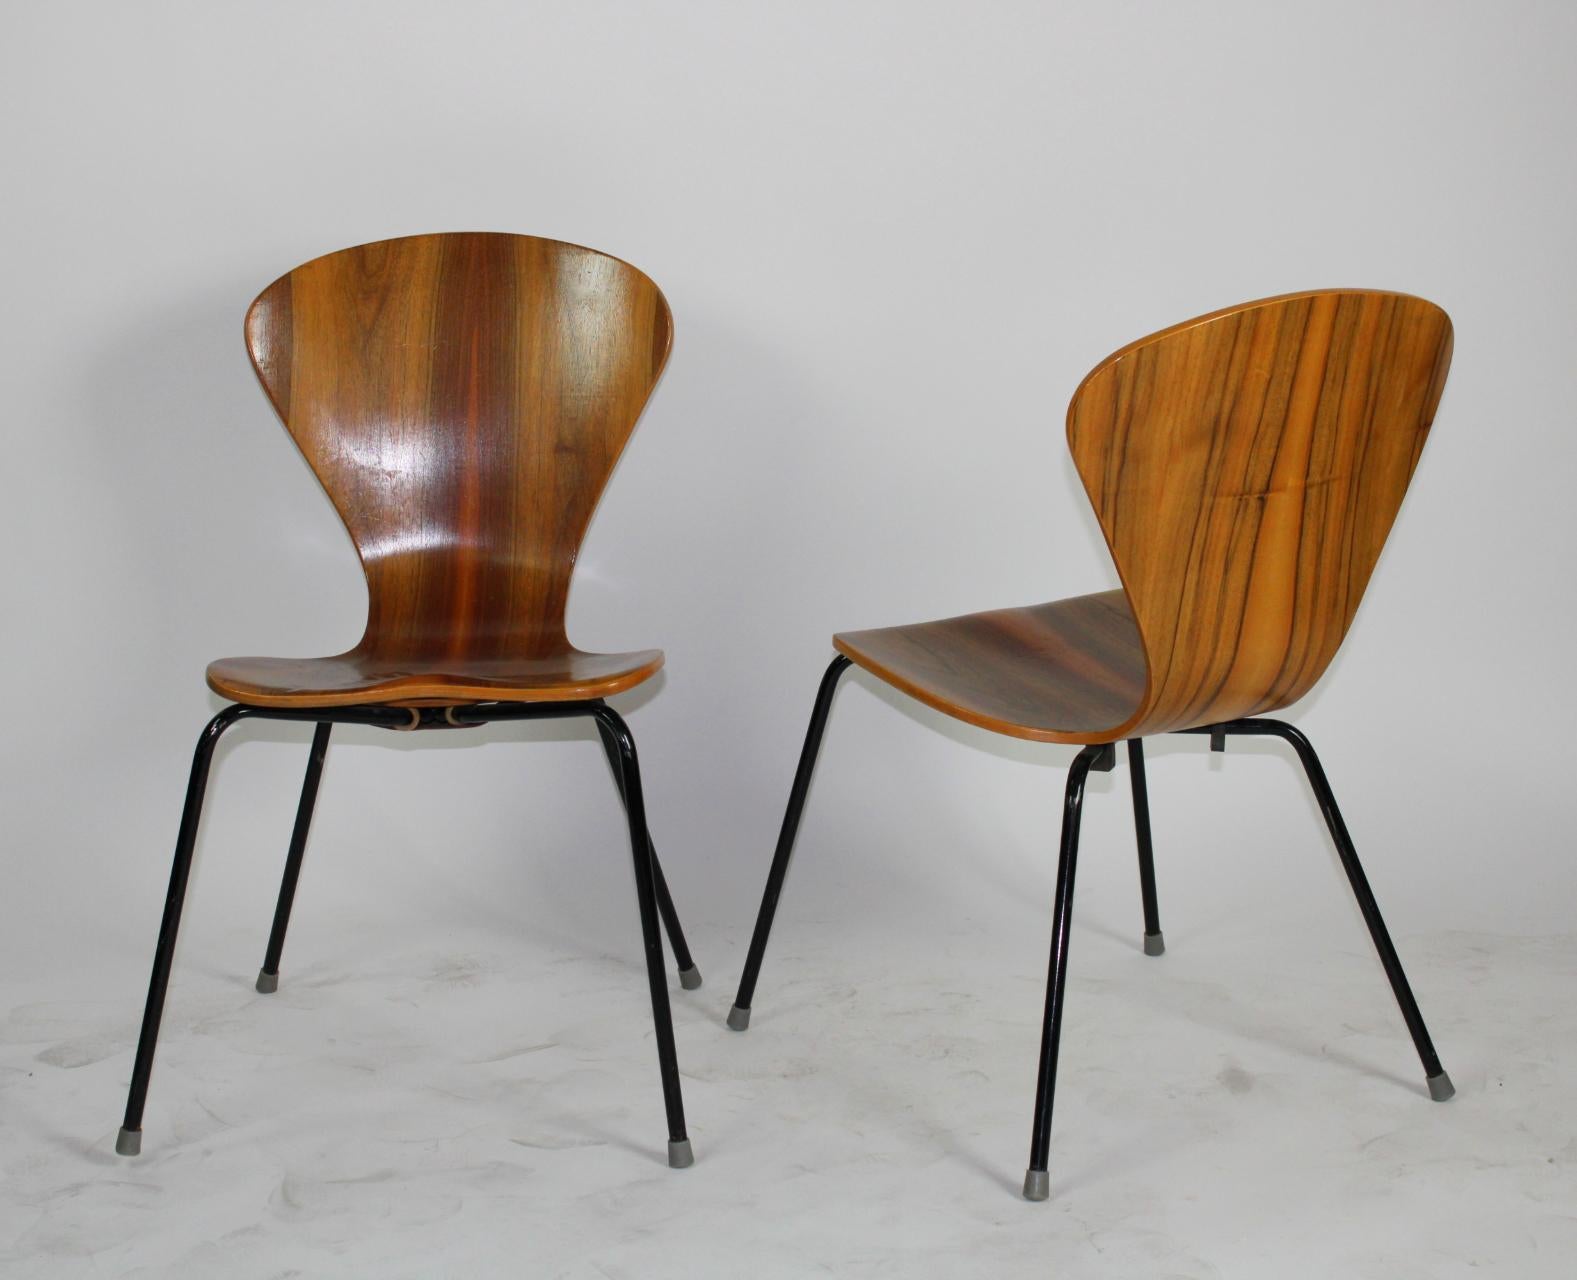 Gorgeous set of 4 molded plywood chairs with exotic wood grain, 
circa 1950s. Black enameled legs. Stackable and extremely comfortable.